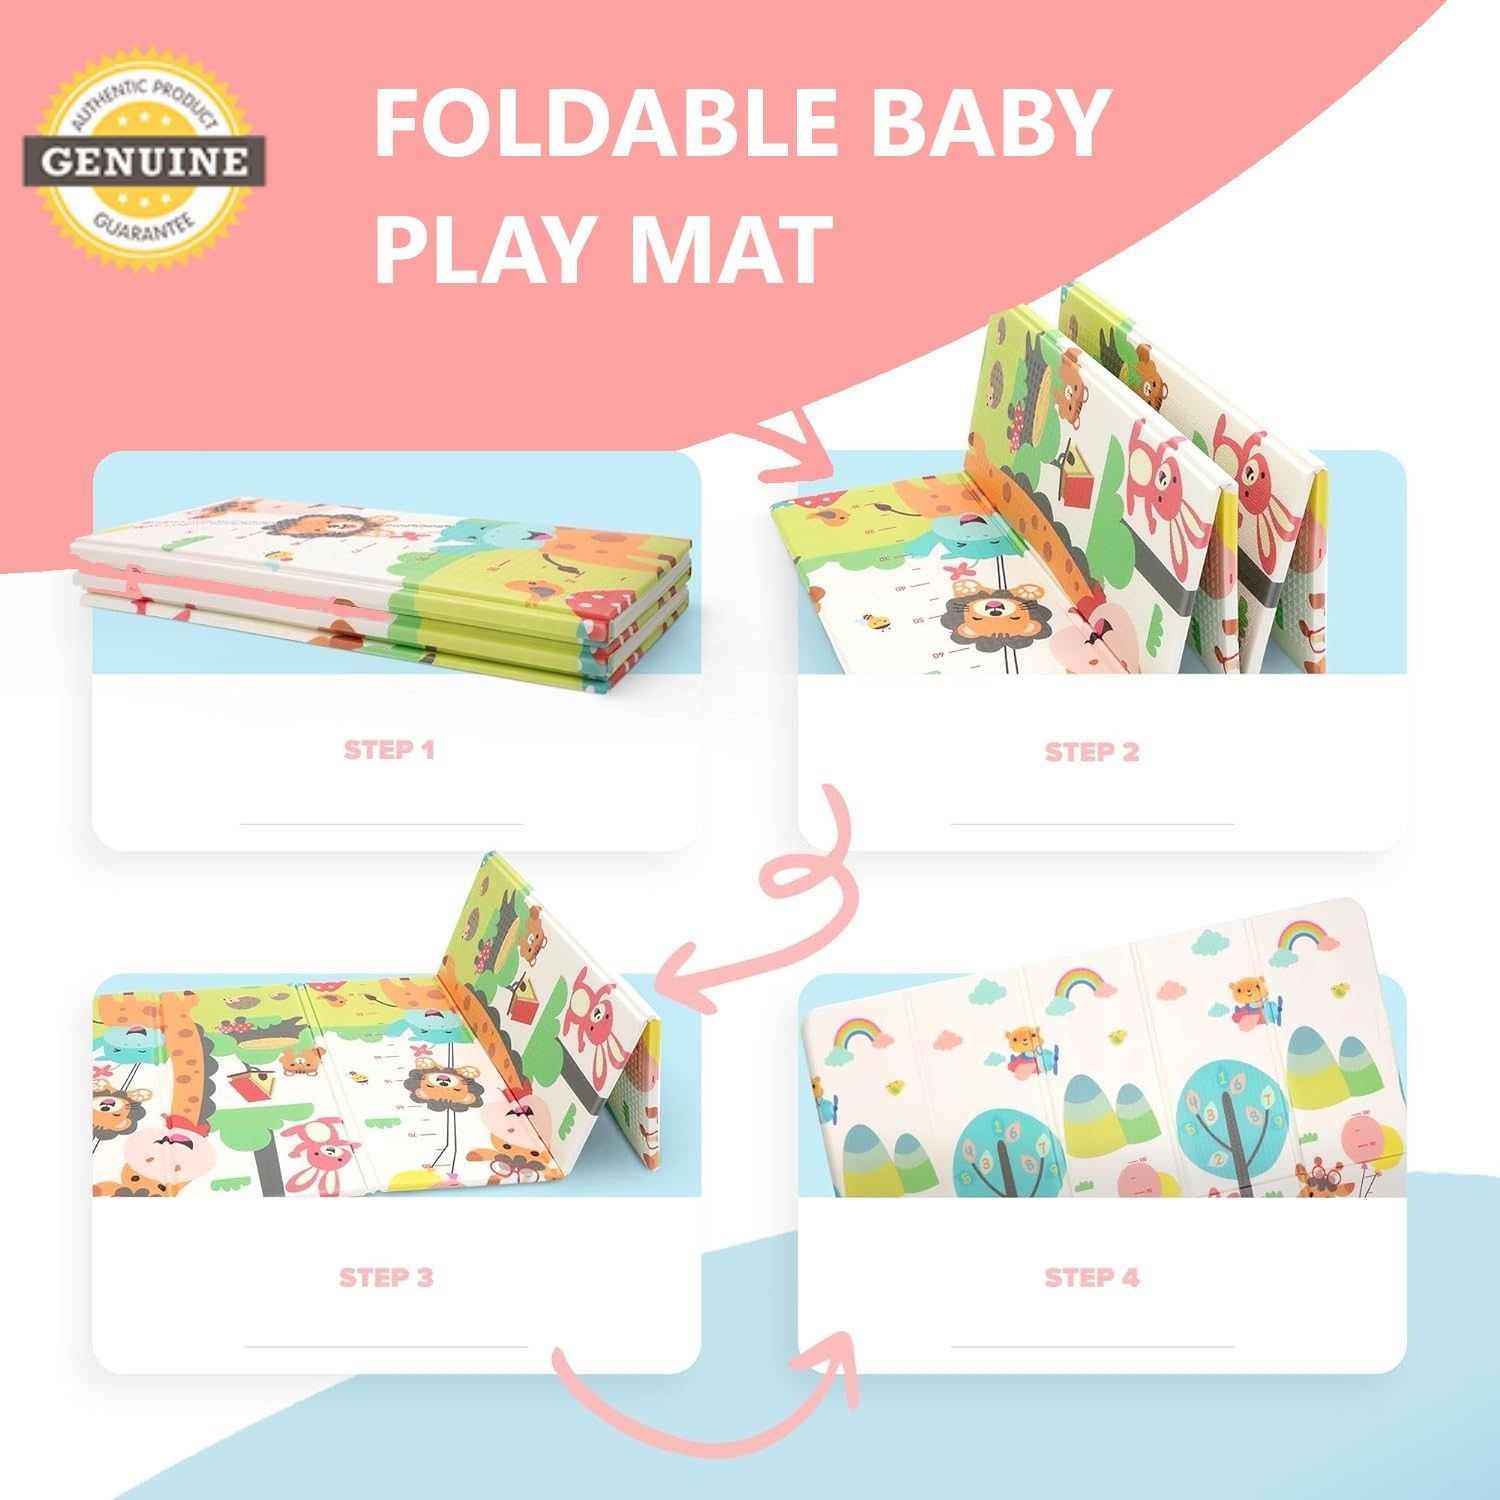 FOLDABLE BABY PLAY MAT